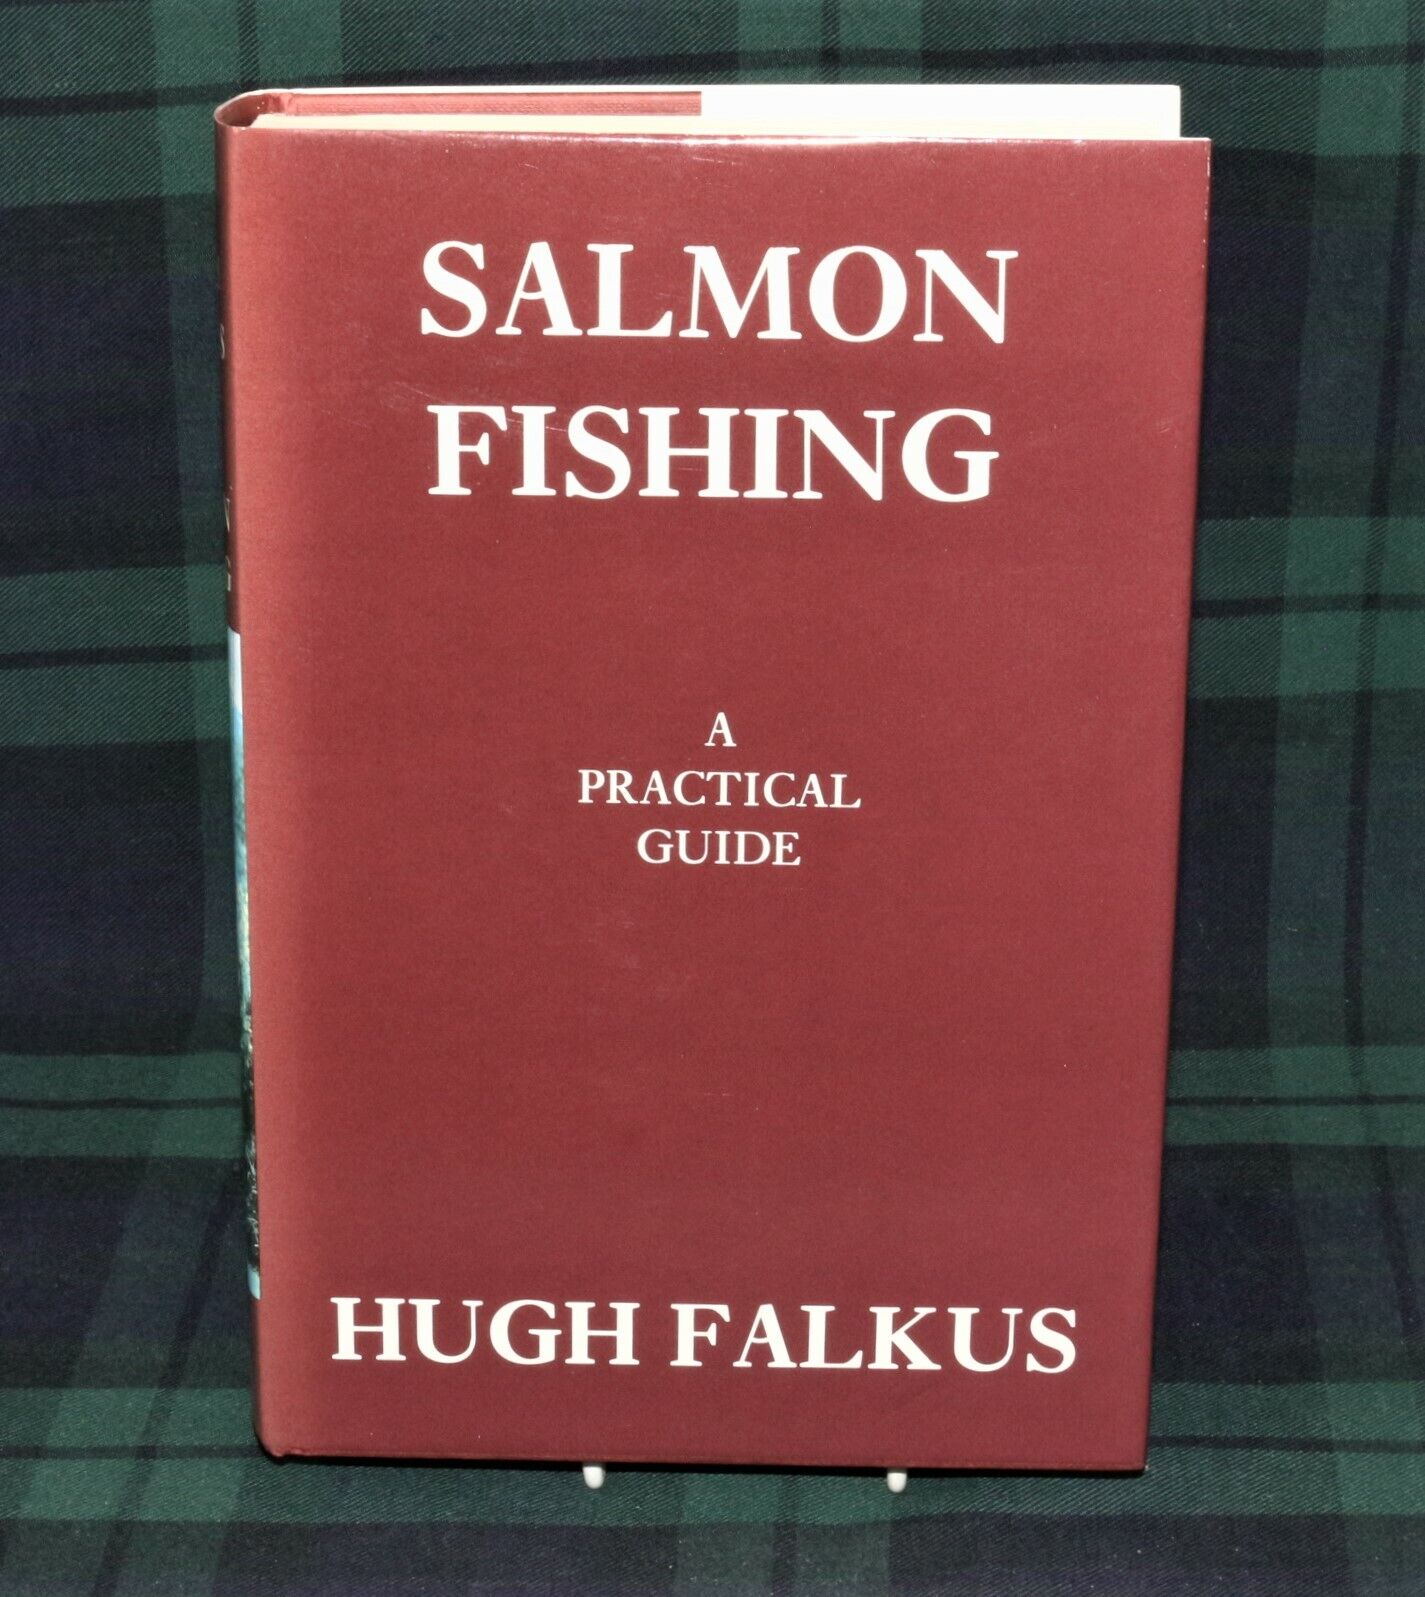 SALMON FISHING Many popular Max 48% OFF brands A Practical Guide Hugh Falkus. by